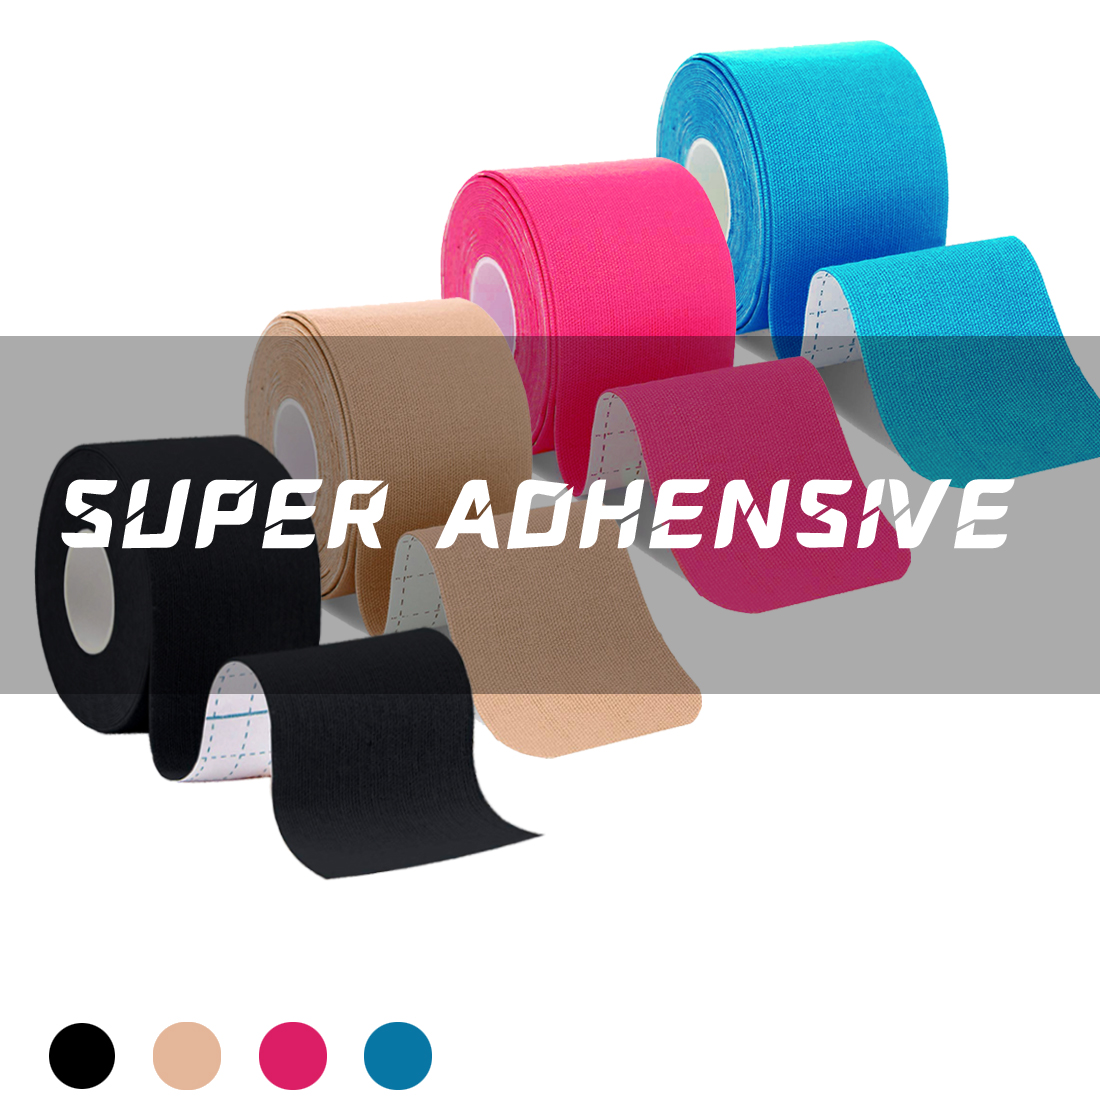 Top 5 Kinesiology Tape Wholesale Suppliers in the USA